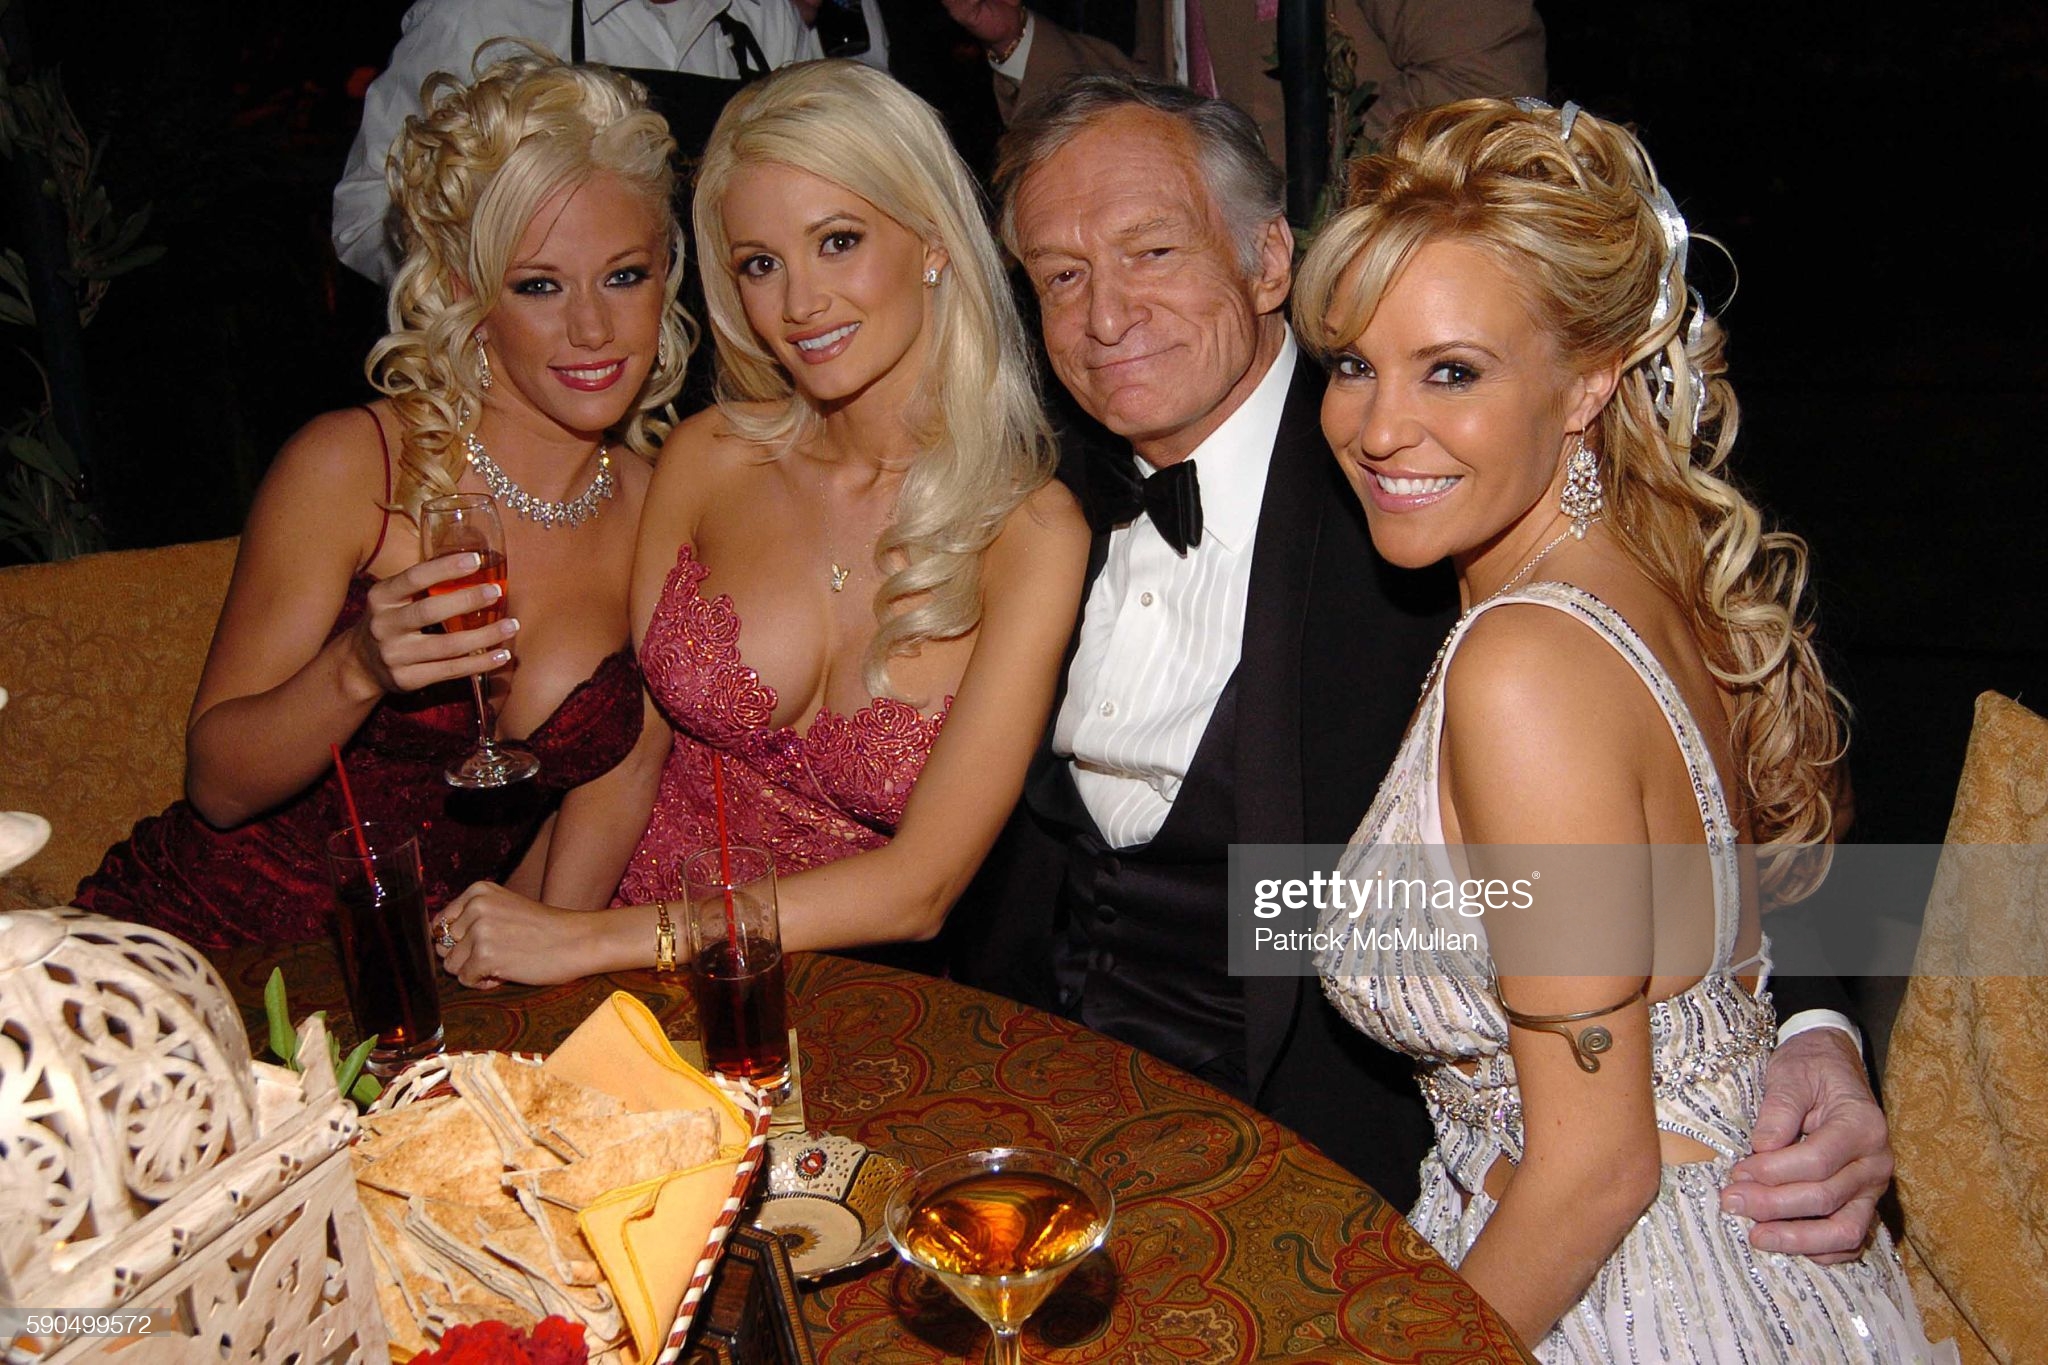 BEVERLY HILLS, CA - JANUARY 16: (L-R) Kendra Wilkinson, Holly Madison, Hugh Hefner and Bridget Marquardt attend HBO Golden Globe Awards After-Party at Griff's Restaurant at the Beverly Hilton Hotel on January 16, 2005 in Beverly Hills, CA. (Photo by Billy Farrell/Patrick McMullan via Getty Images)